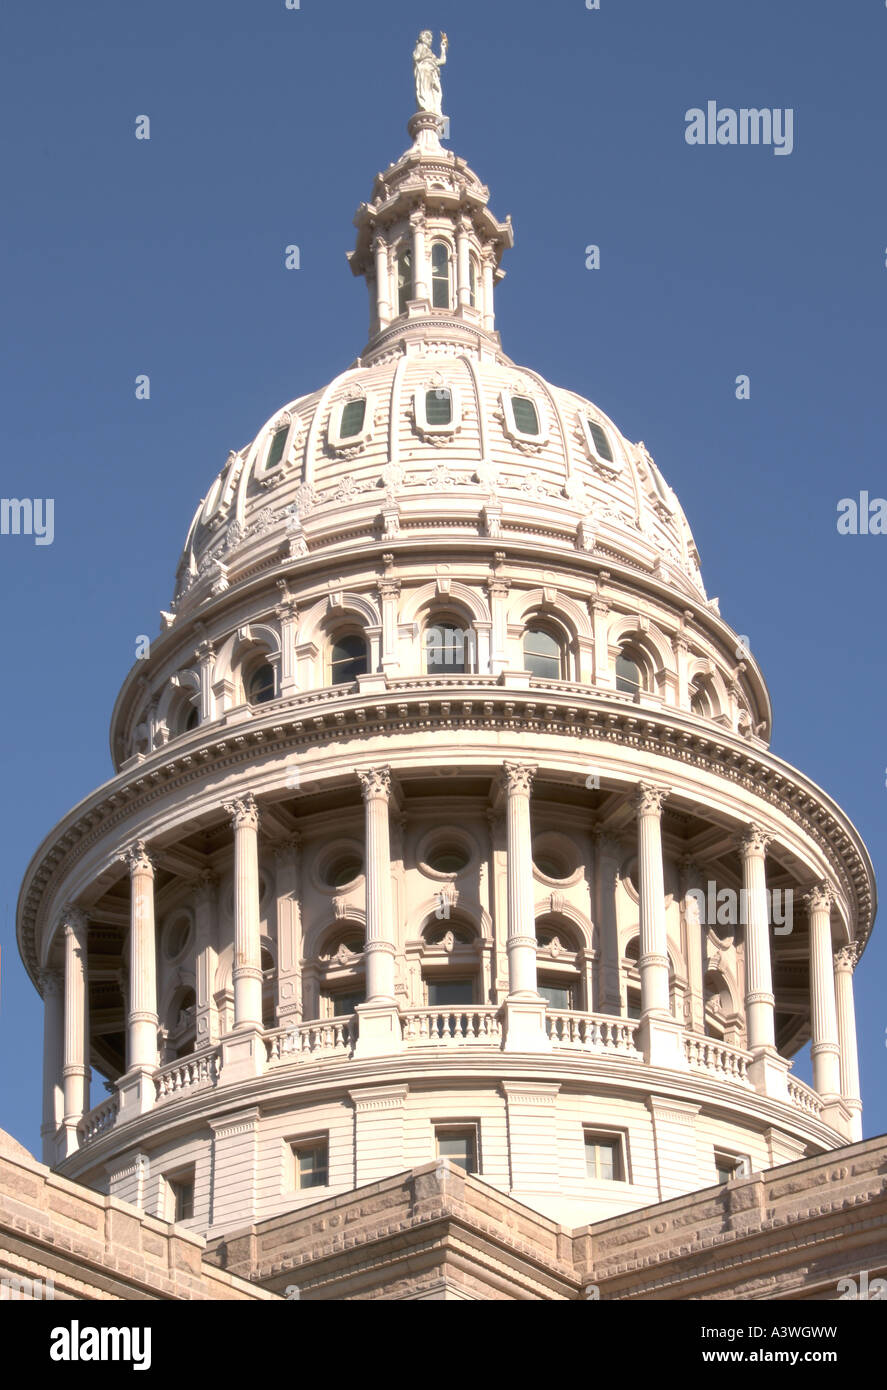 Dome of state capitol building in Austin, TX Stock Photo